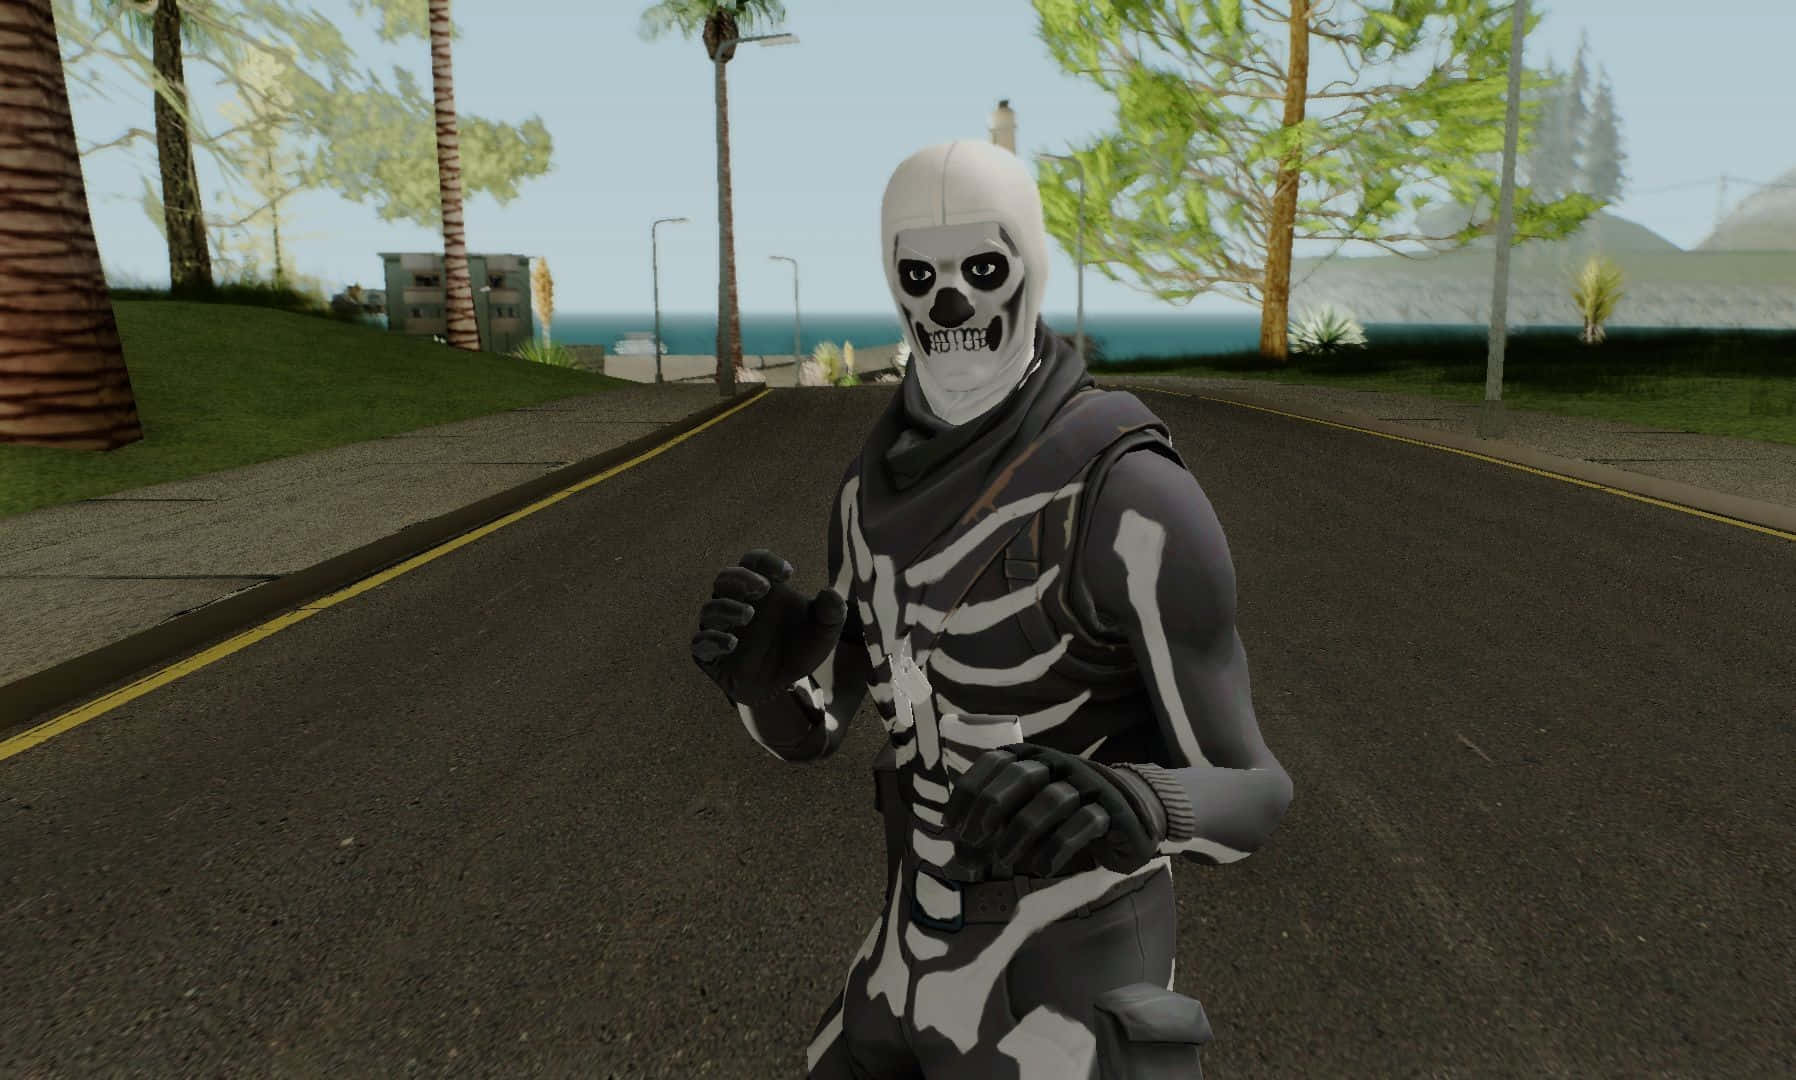 Get Into The Halloween Spirit With A Fun Skeleton Costume! Wallpaper